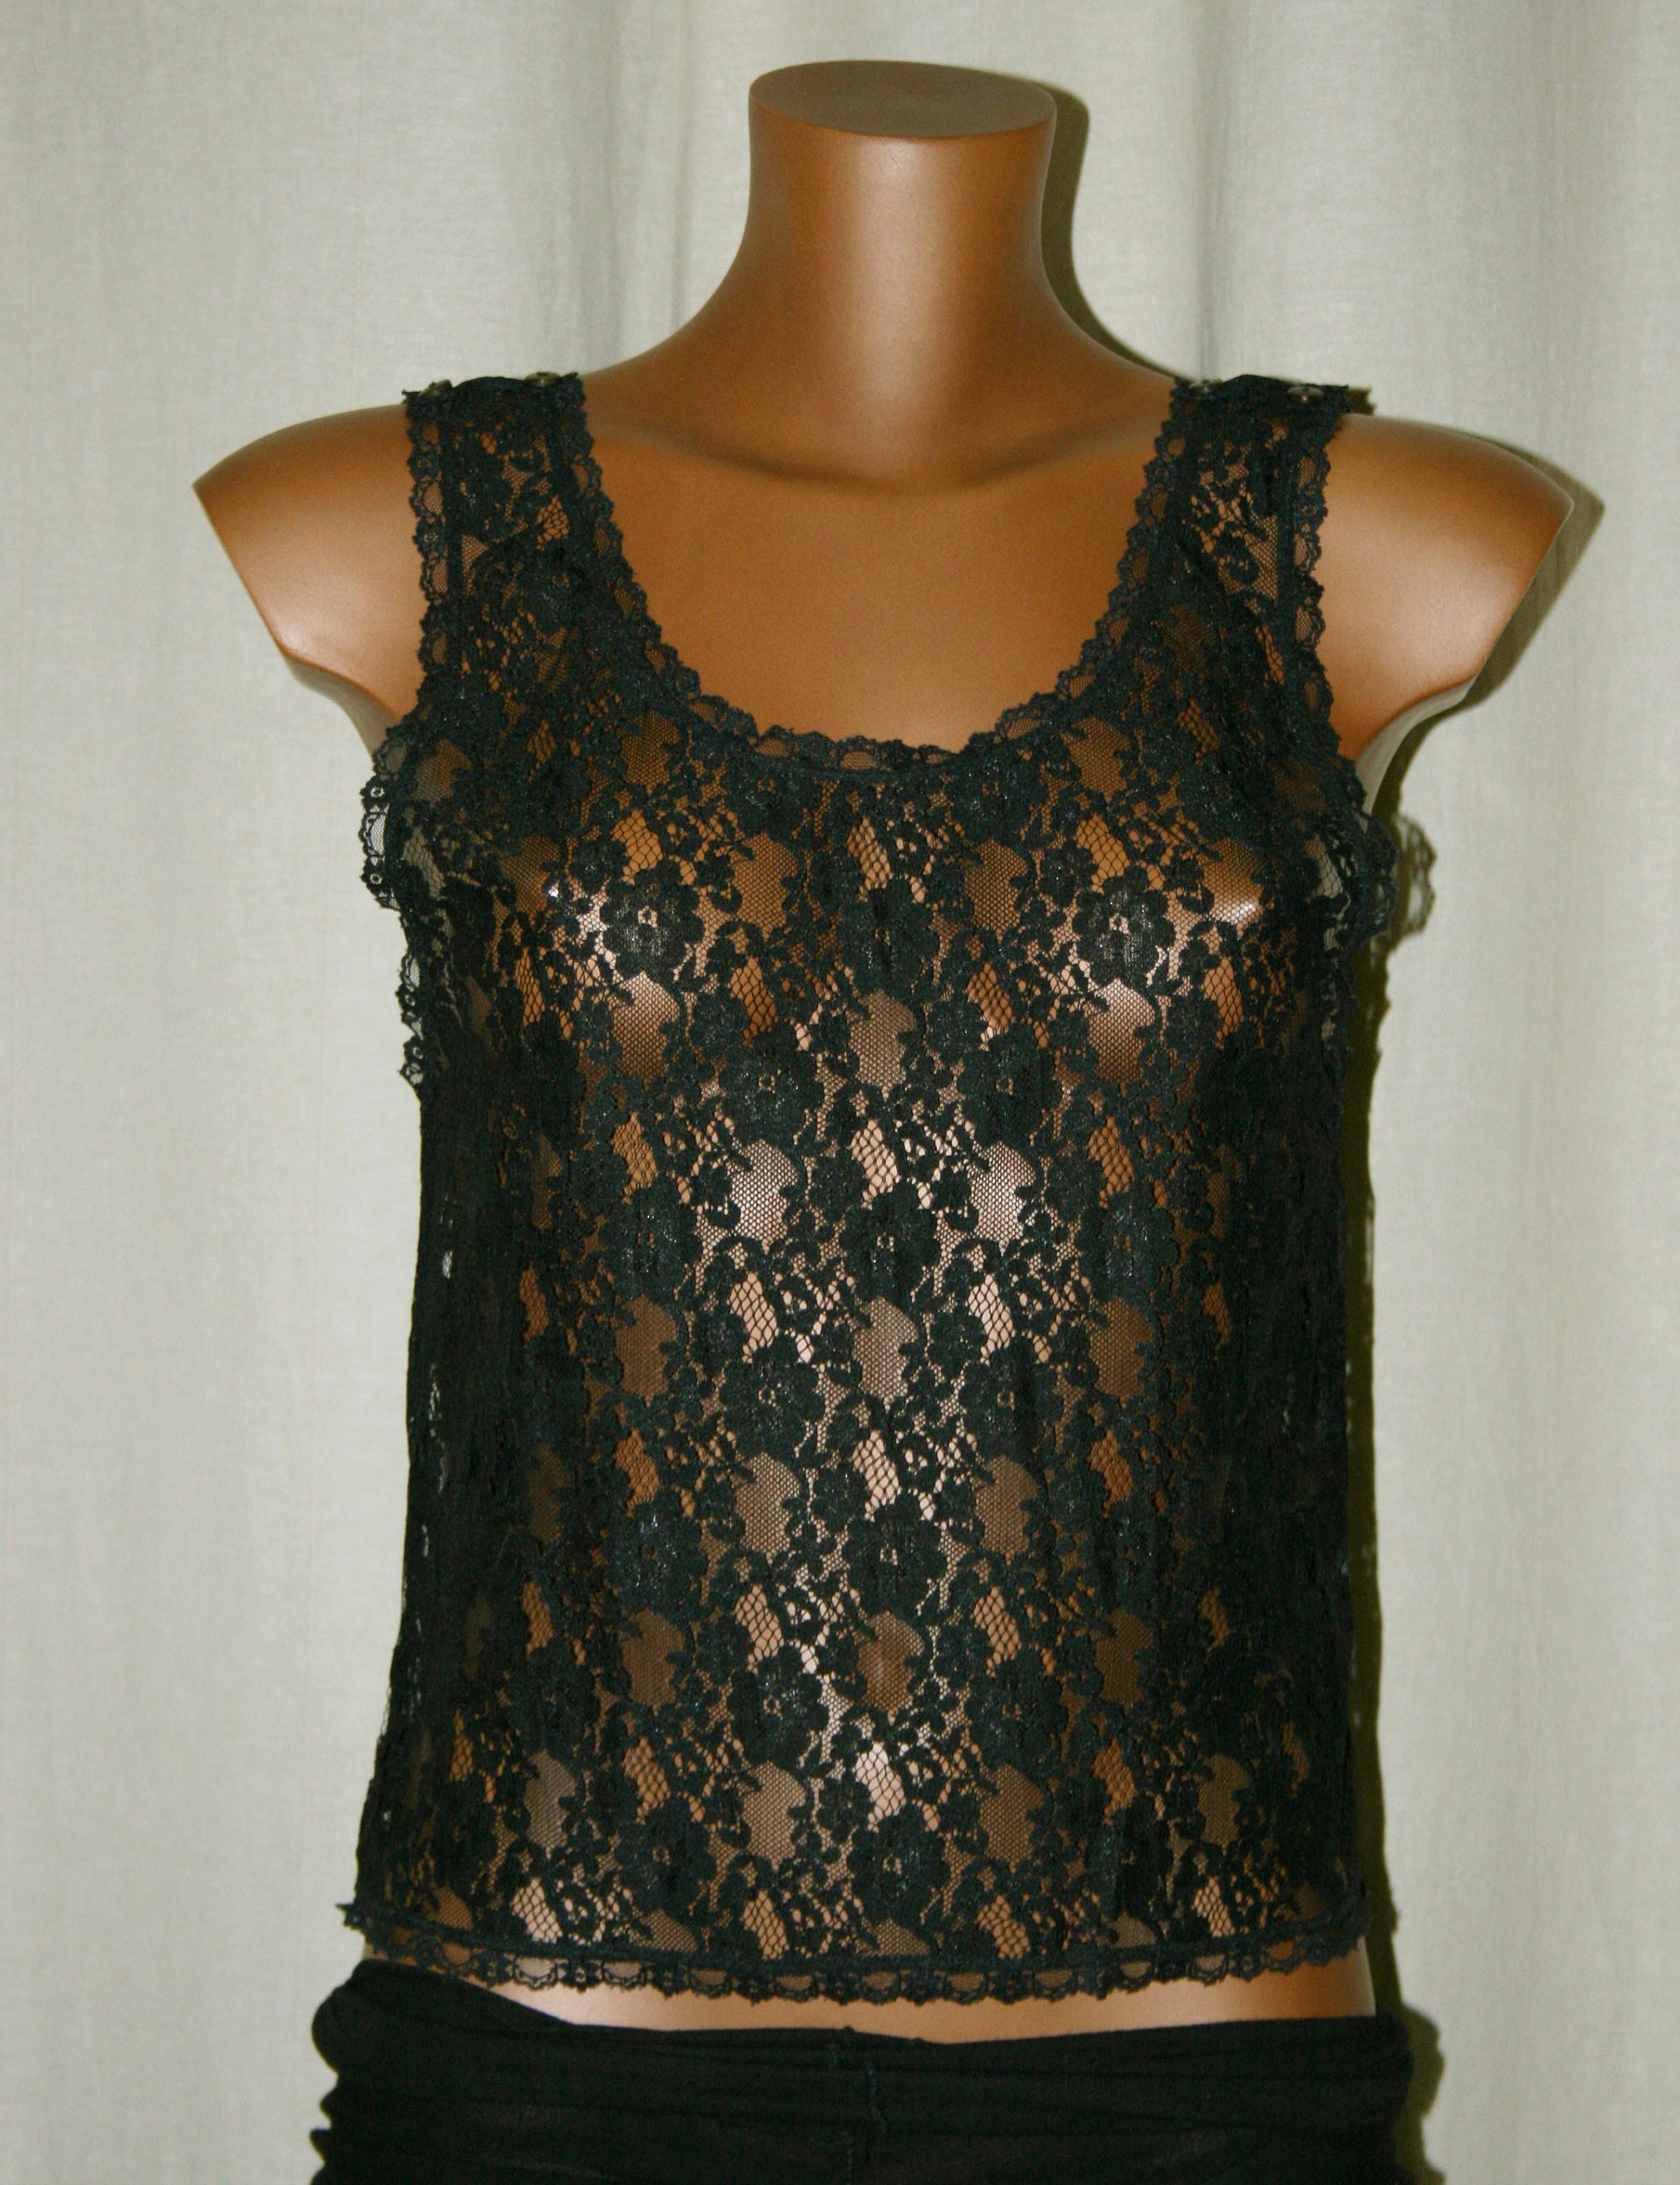 Vintage 80's Embroidered Lace Black Tank Top S